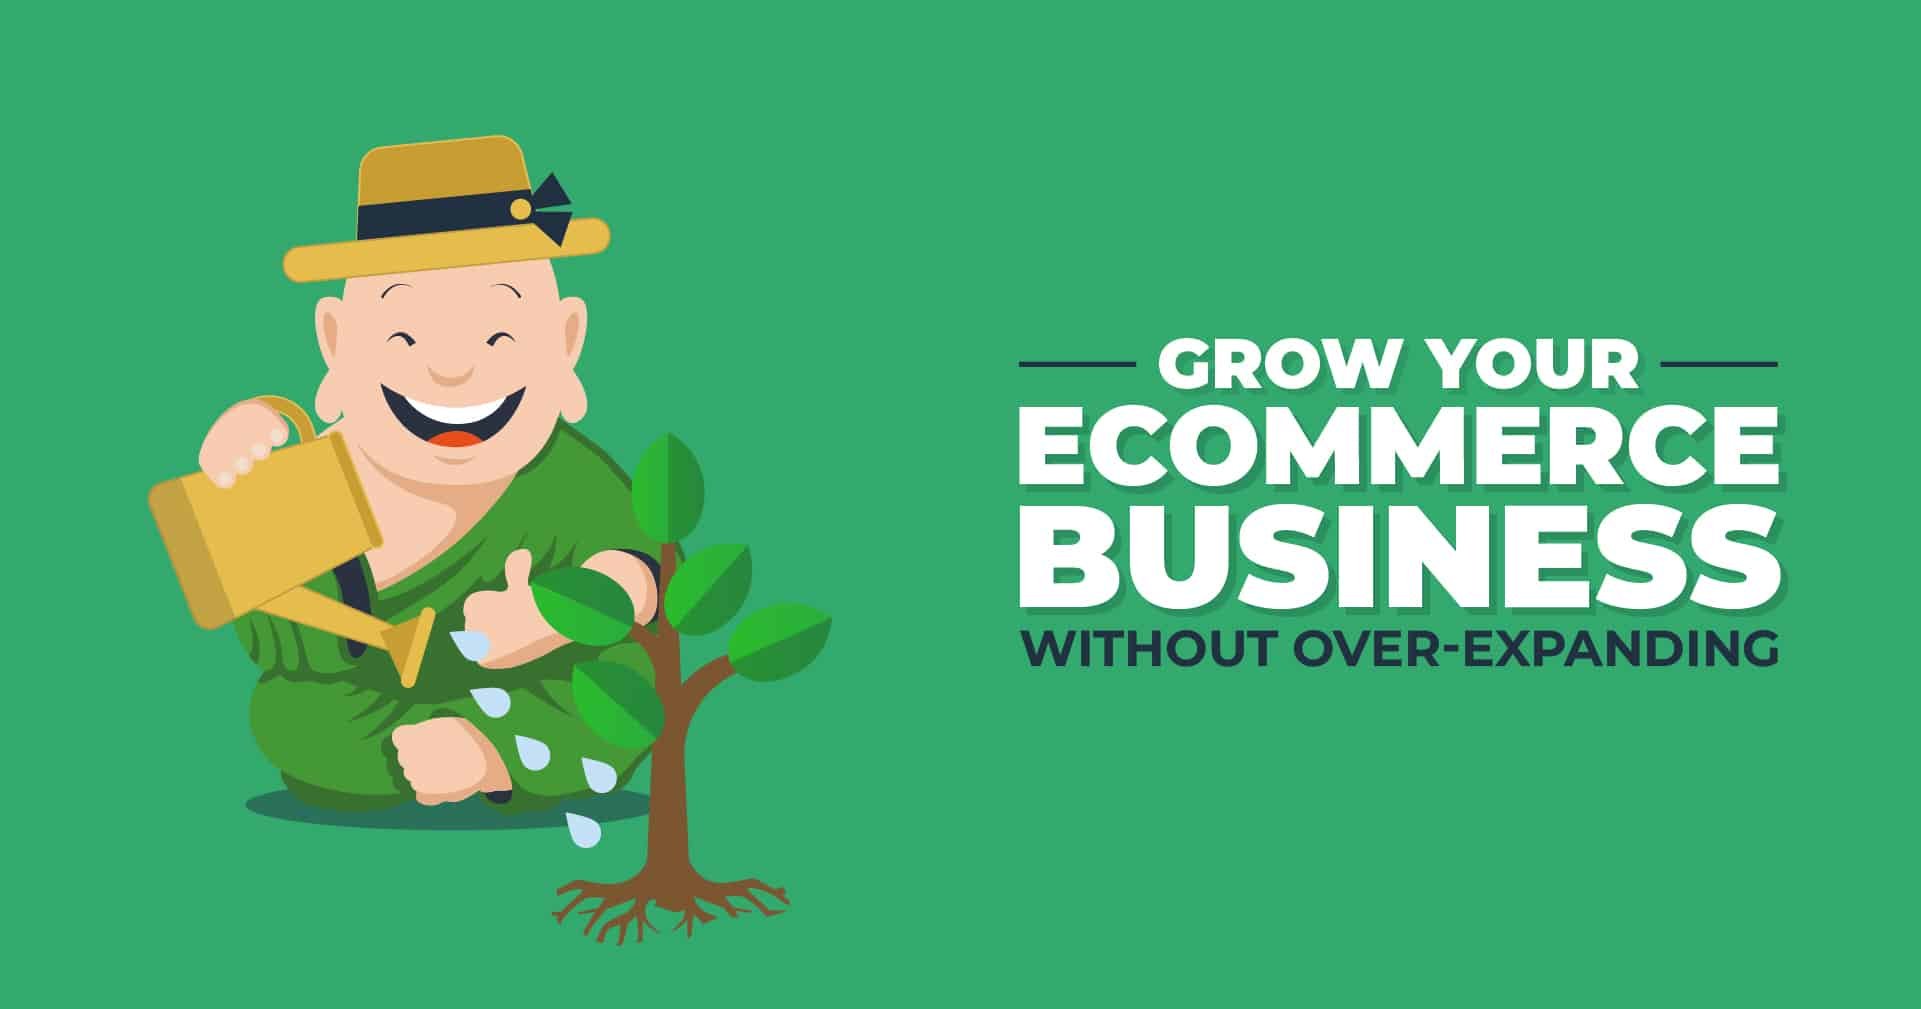 Grow Your Ecommerce Business without Over-Expanding